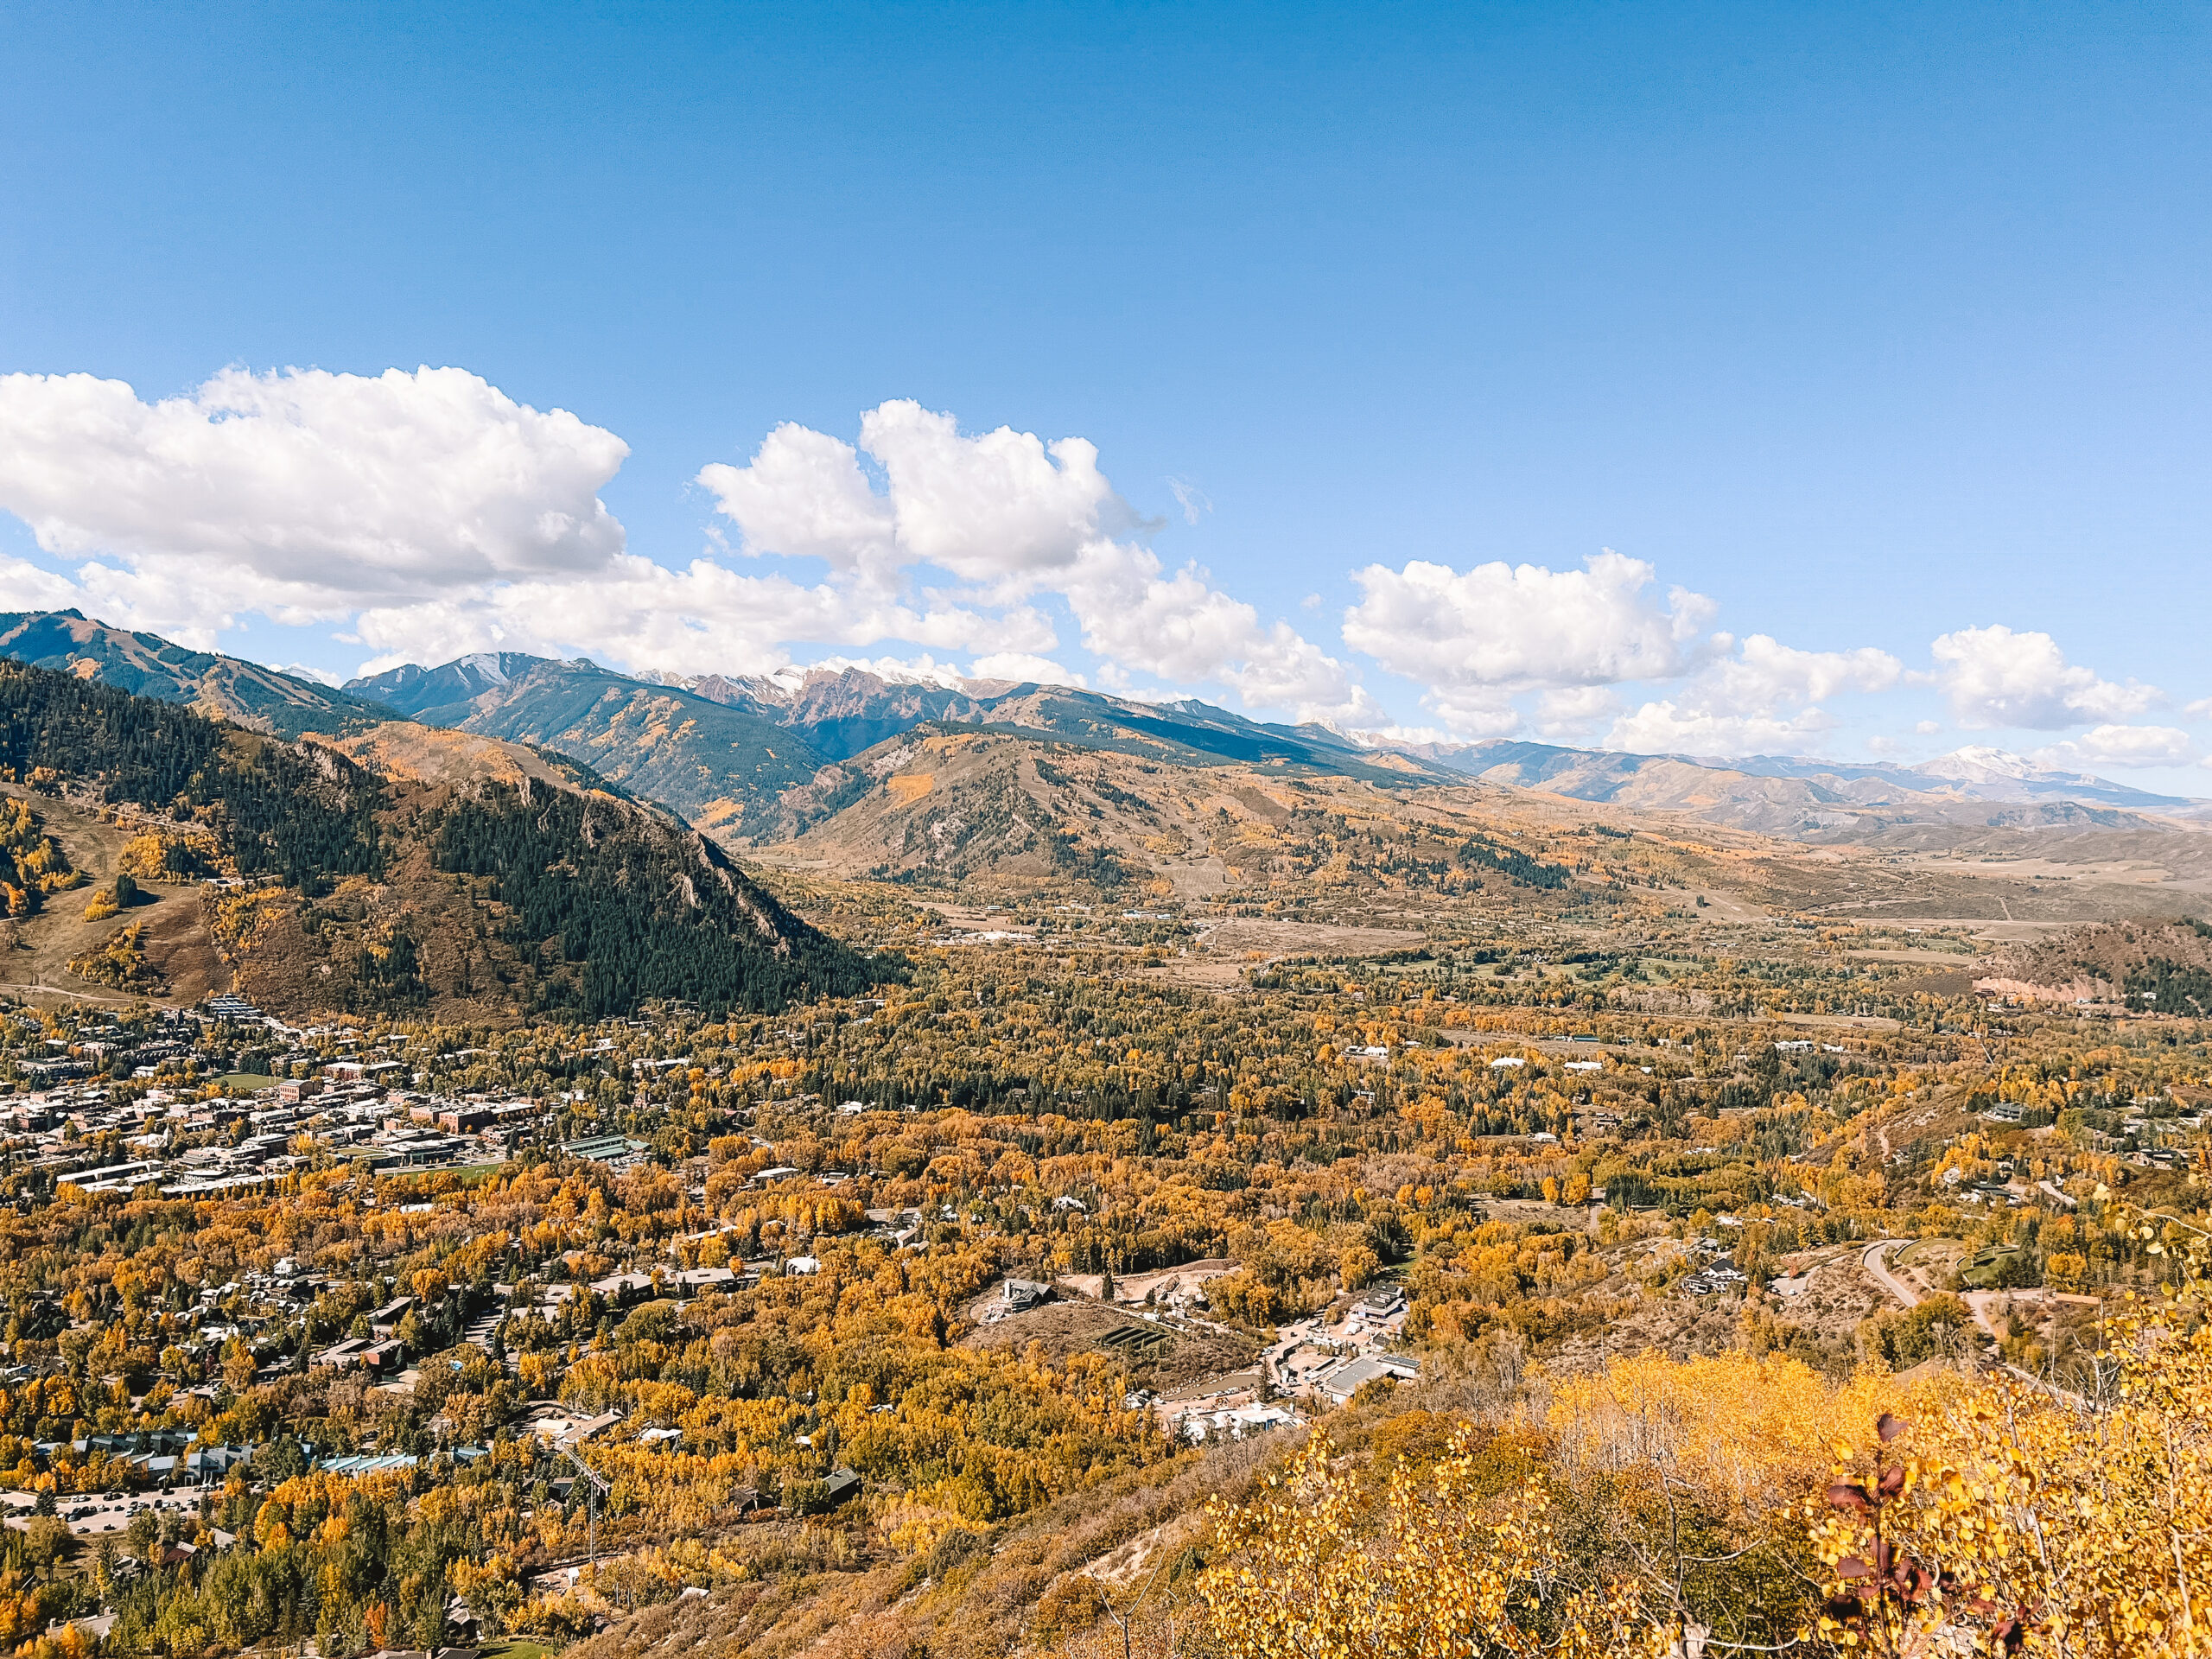 View from the observation deck on Smuggler mountain of the cute town of Aspen, below. #thingstodoinaspen #aspenhikes